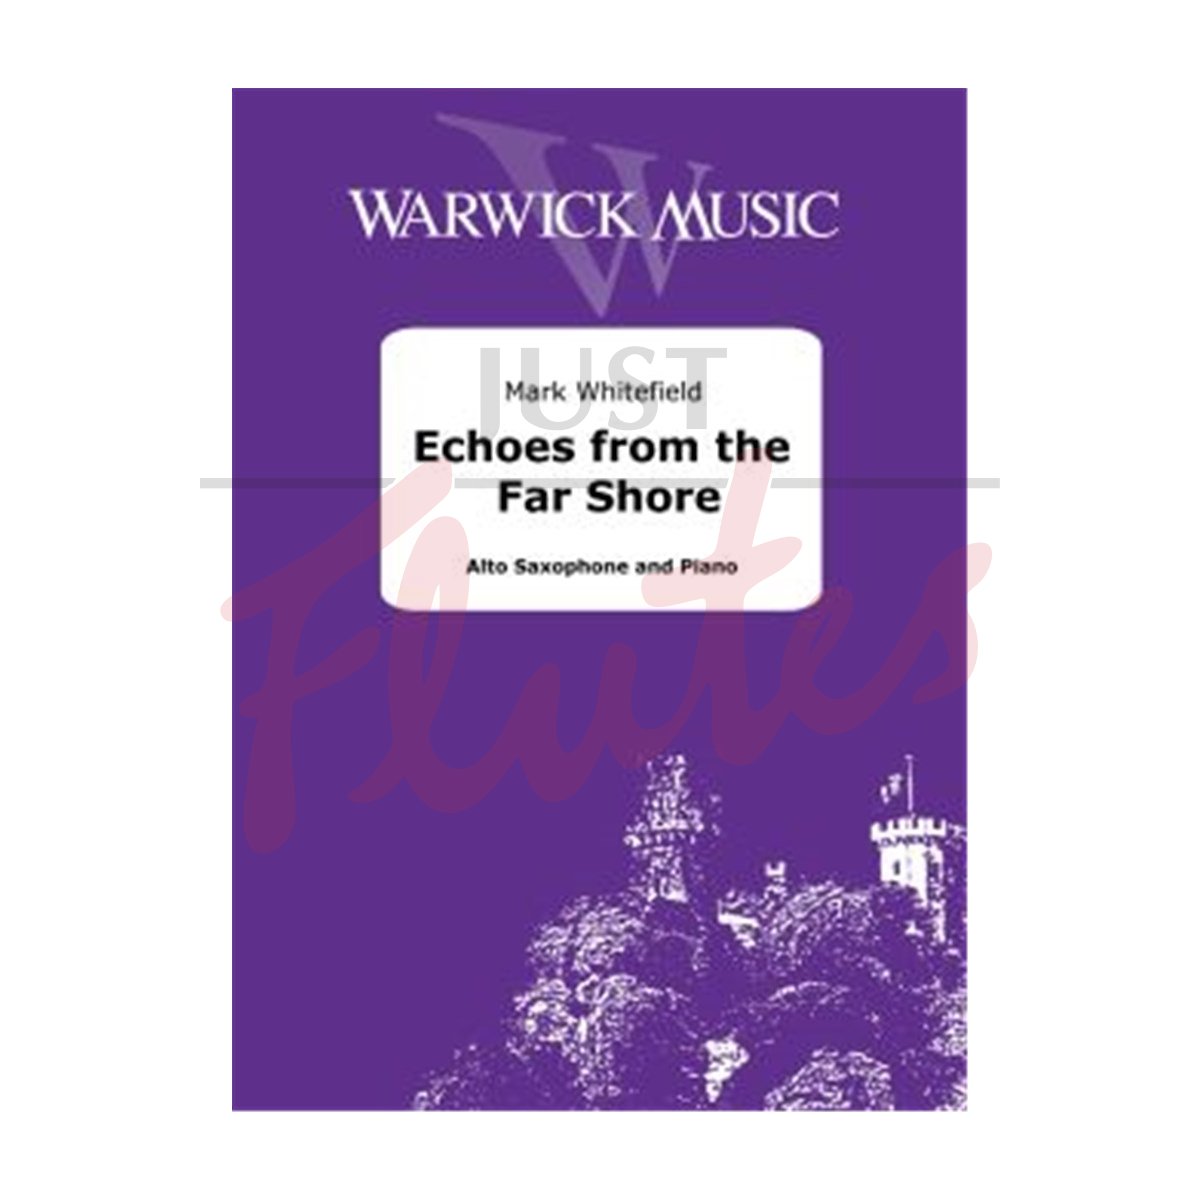 Echoes from the Far Shore for Alto Saxophone and Piano